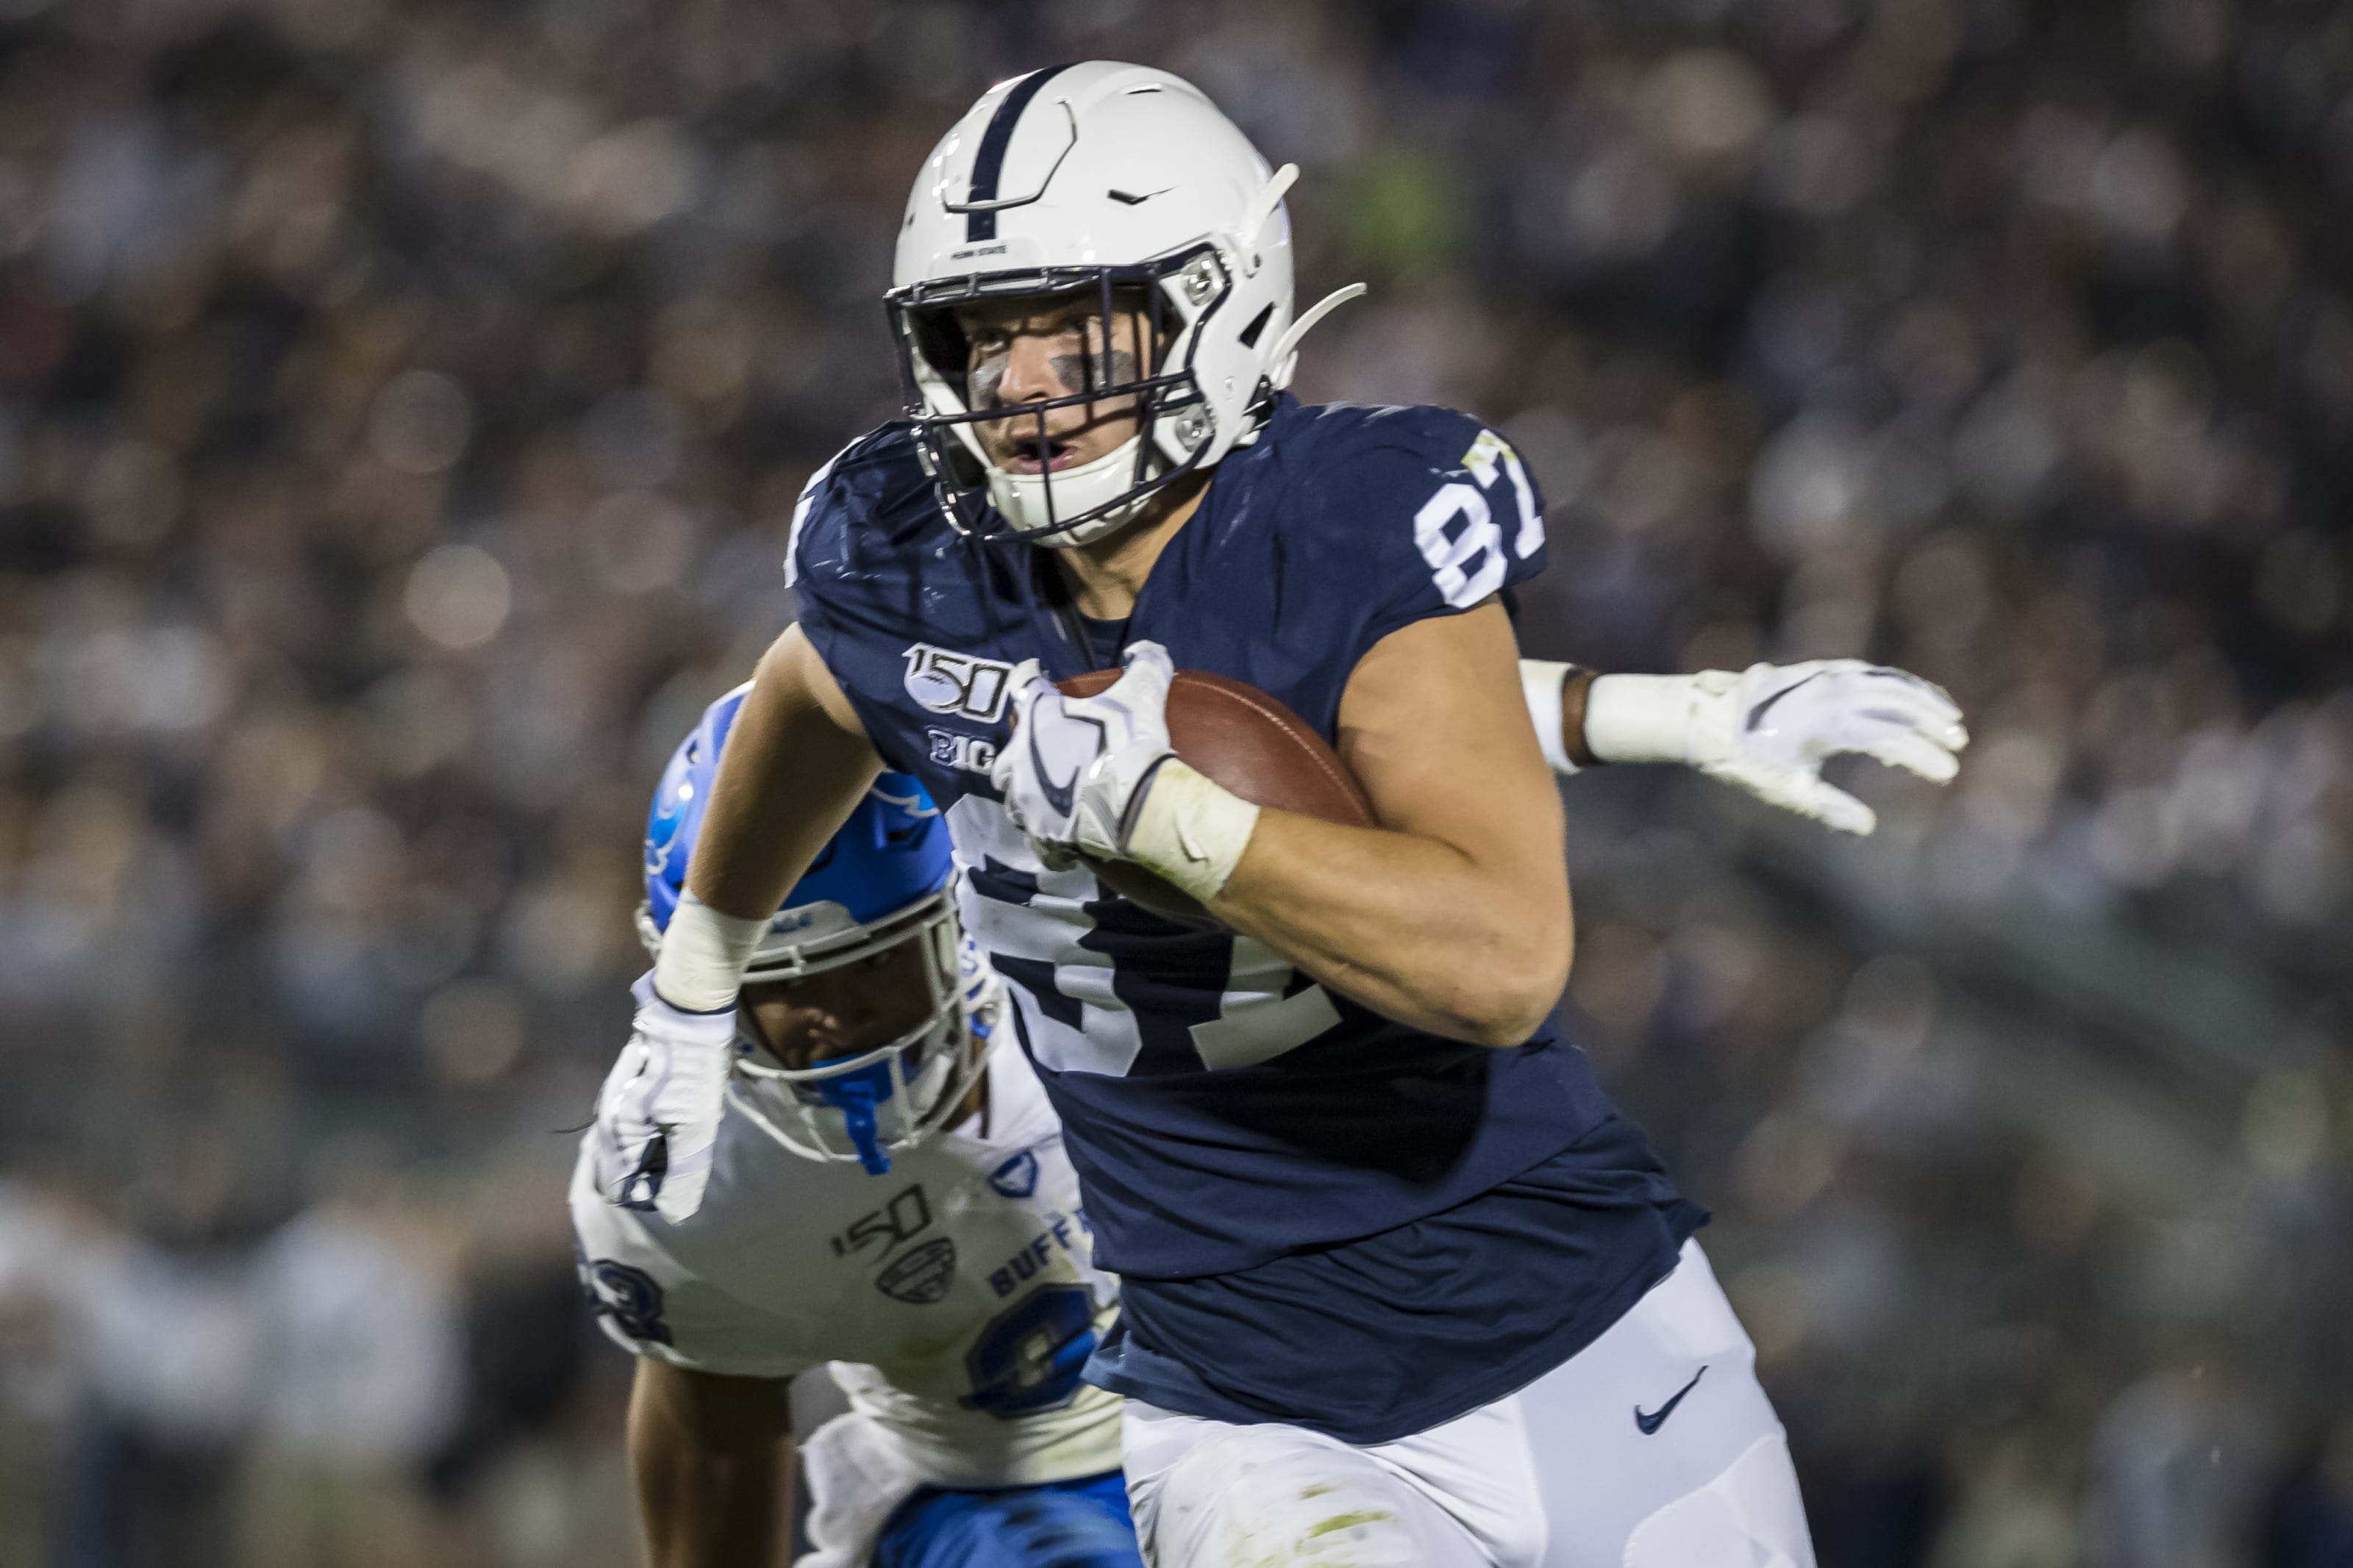 2021 NFL Draft tight end rankings: Kyle Pitts leads the way - Page 2